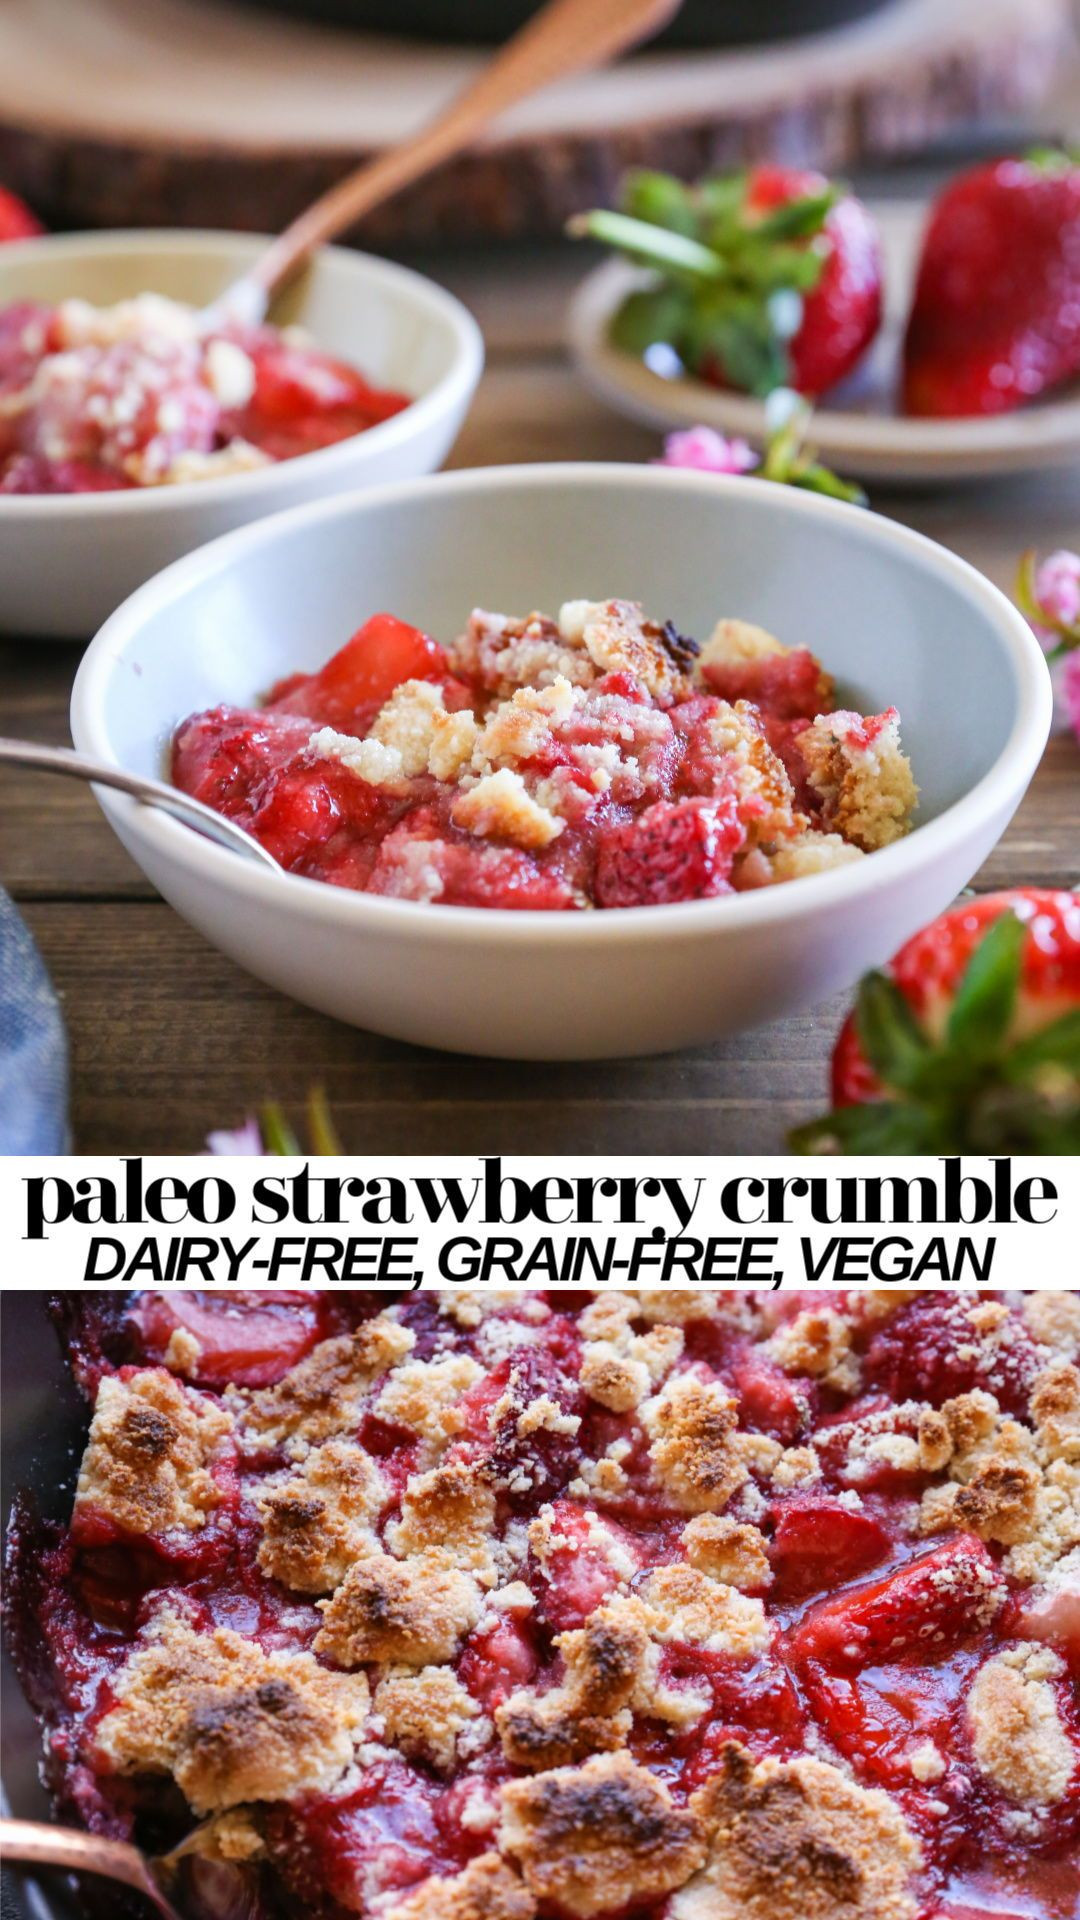 Whole Foods Gluten Free Desserts
 Paleo Strawberry Crumble in 2020